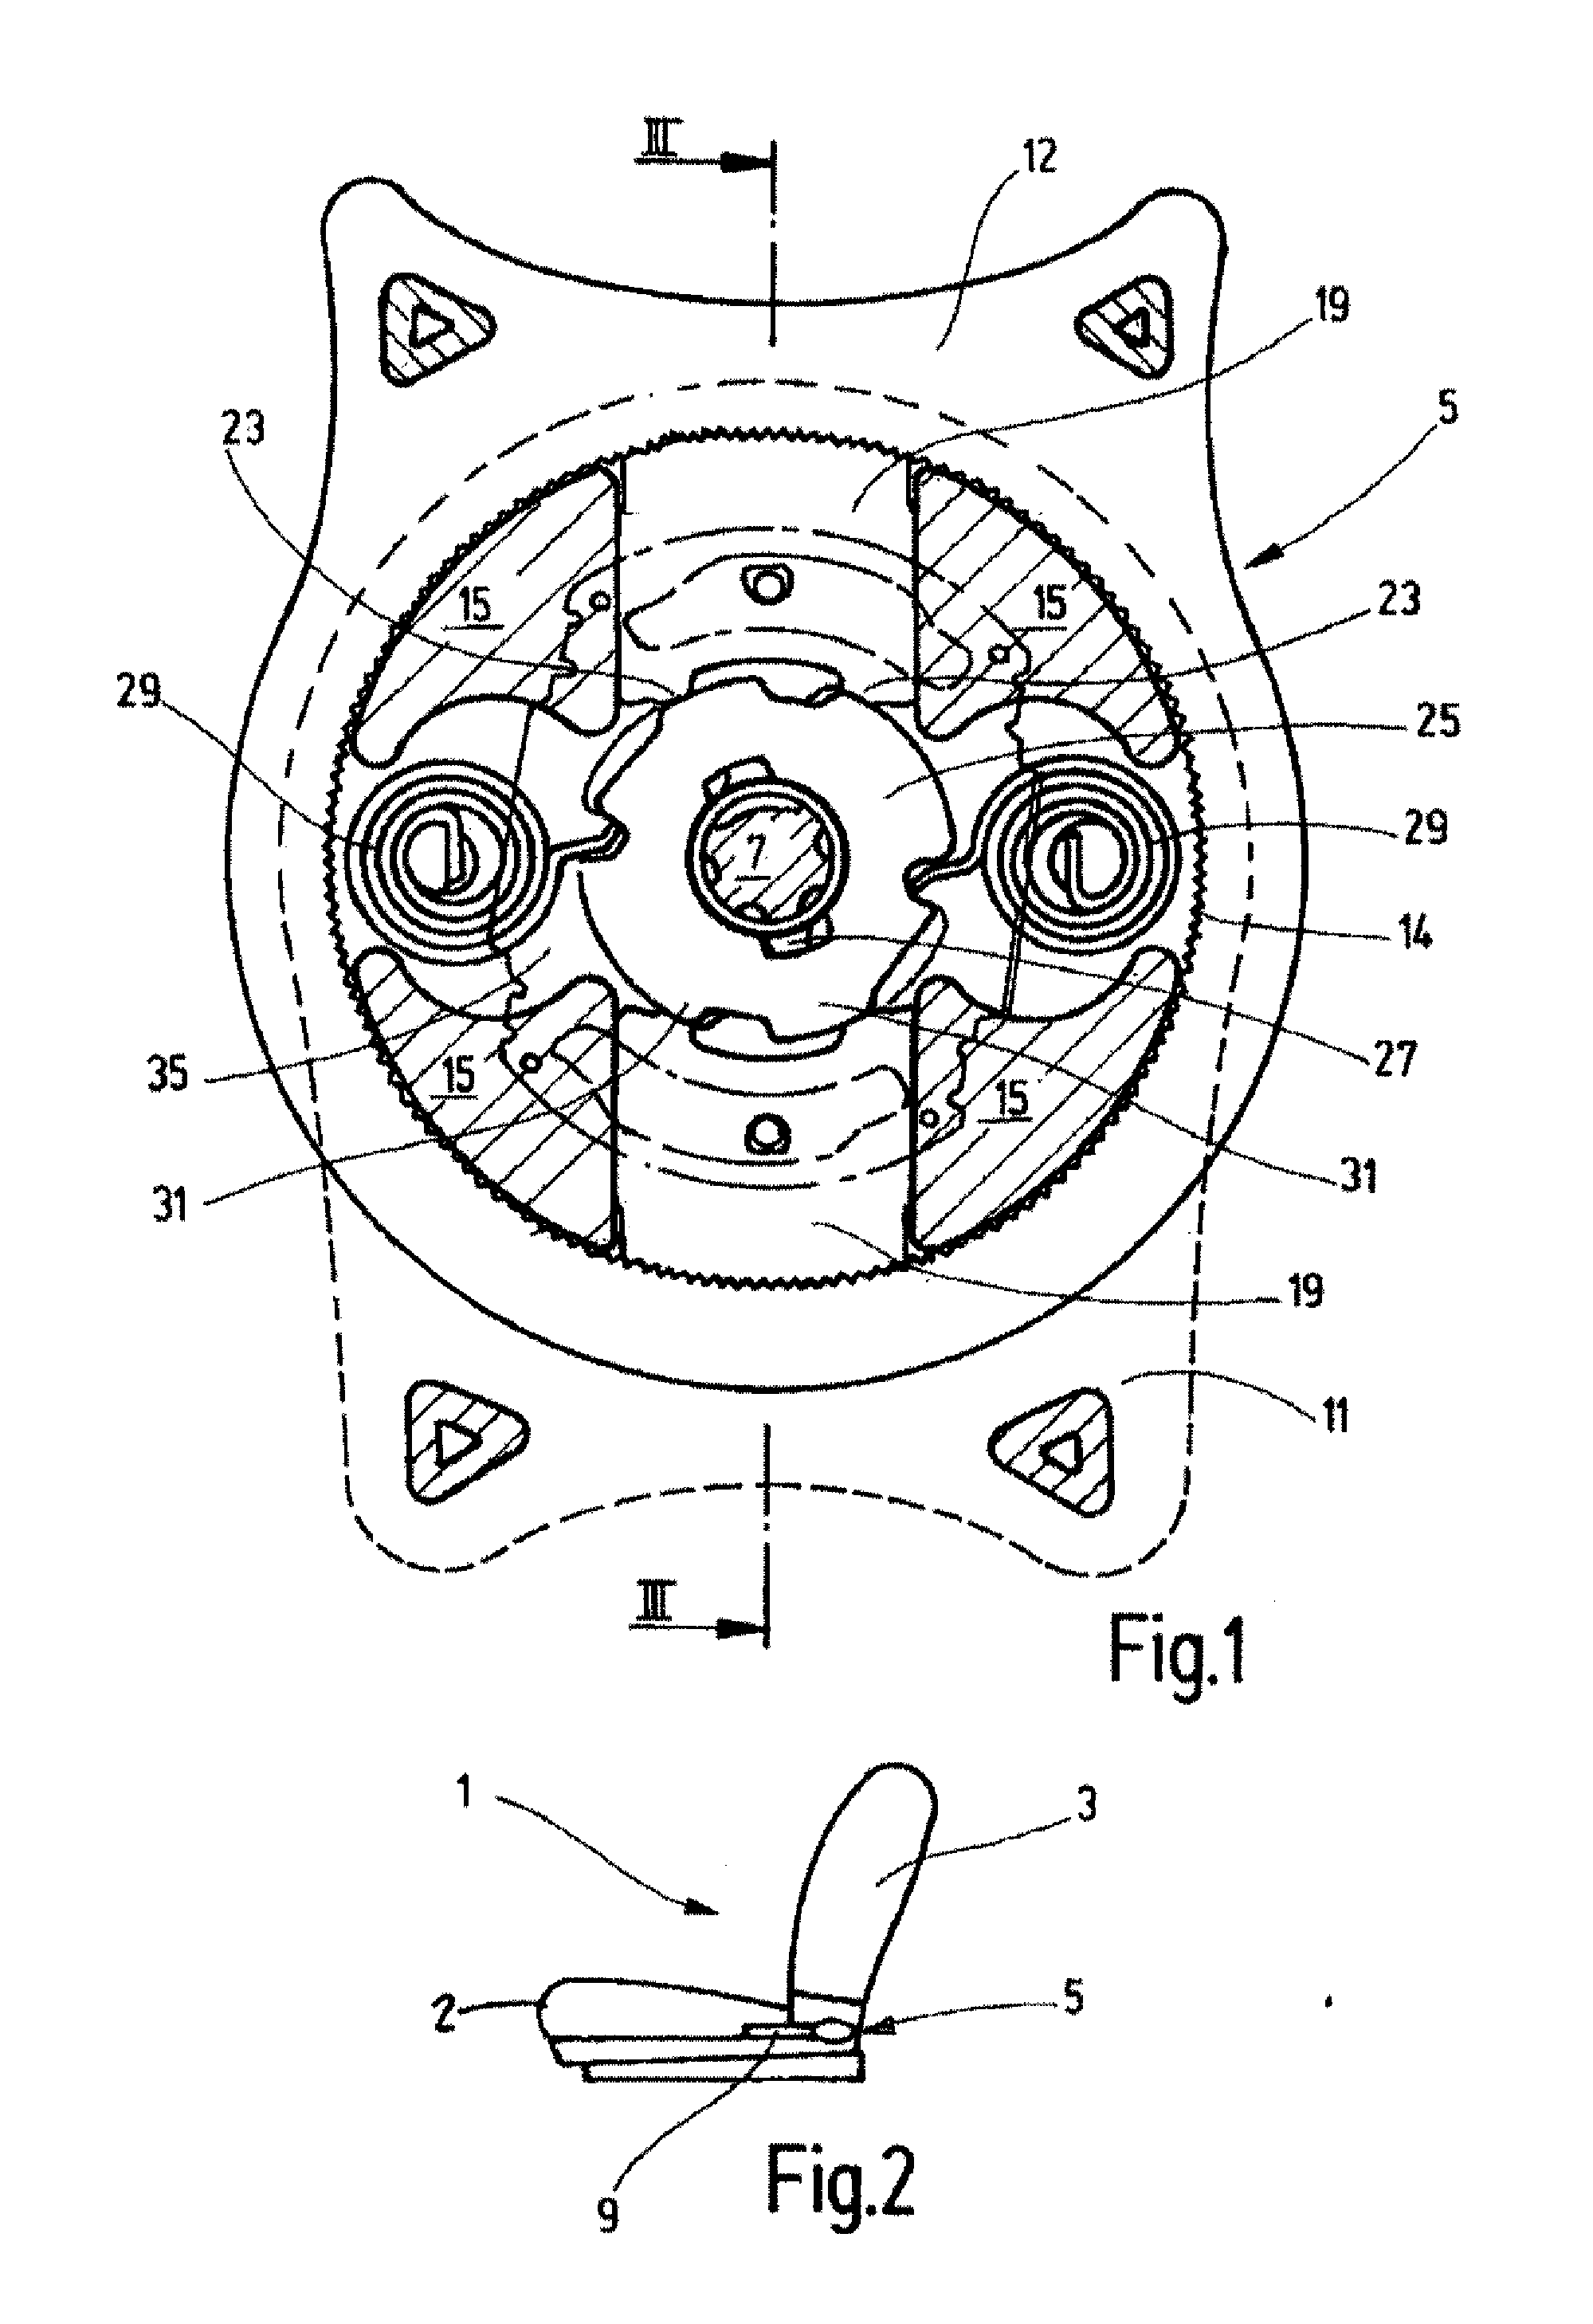 Vehicle seat and recliner fitting for vehicle seat